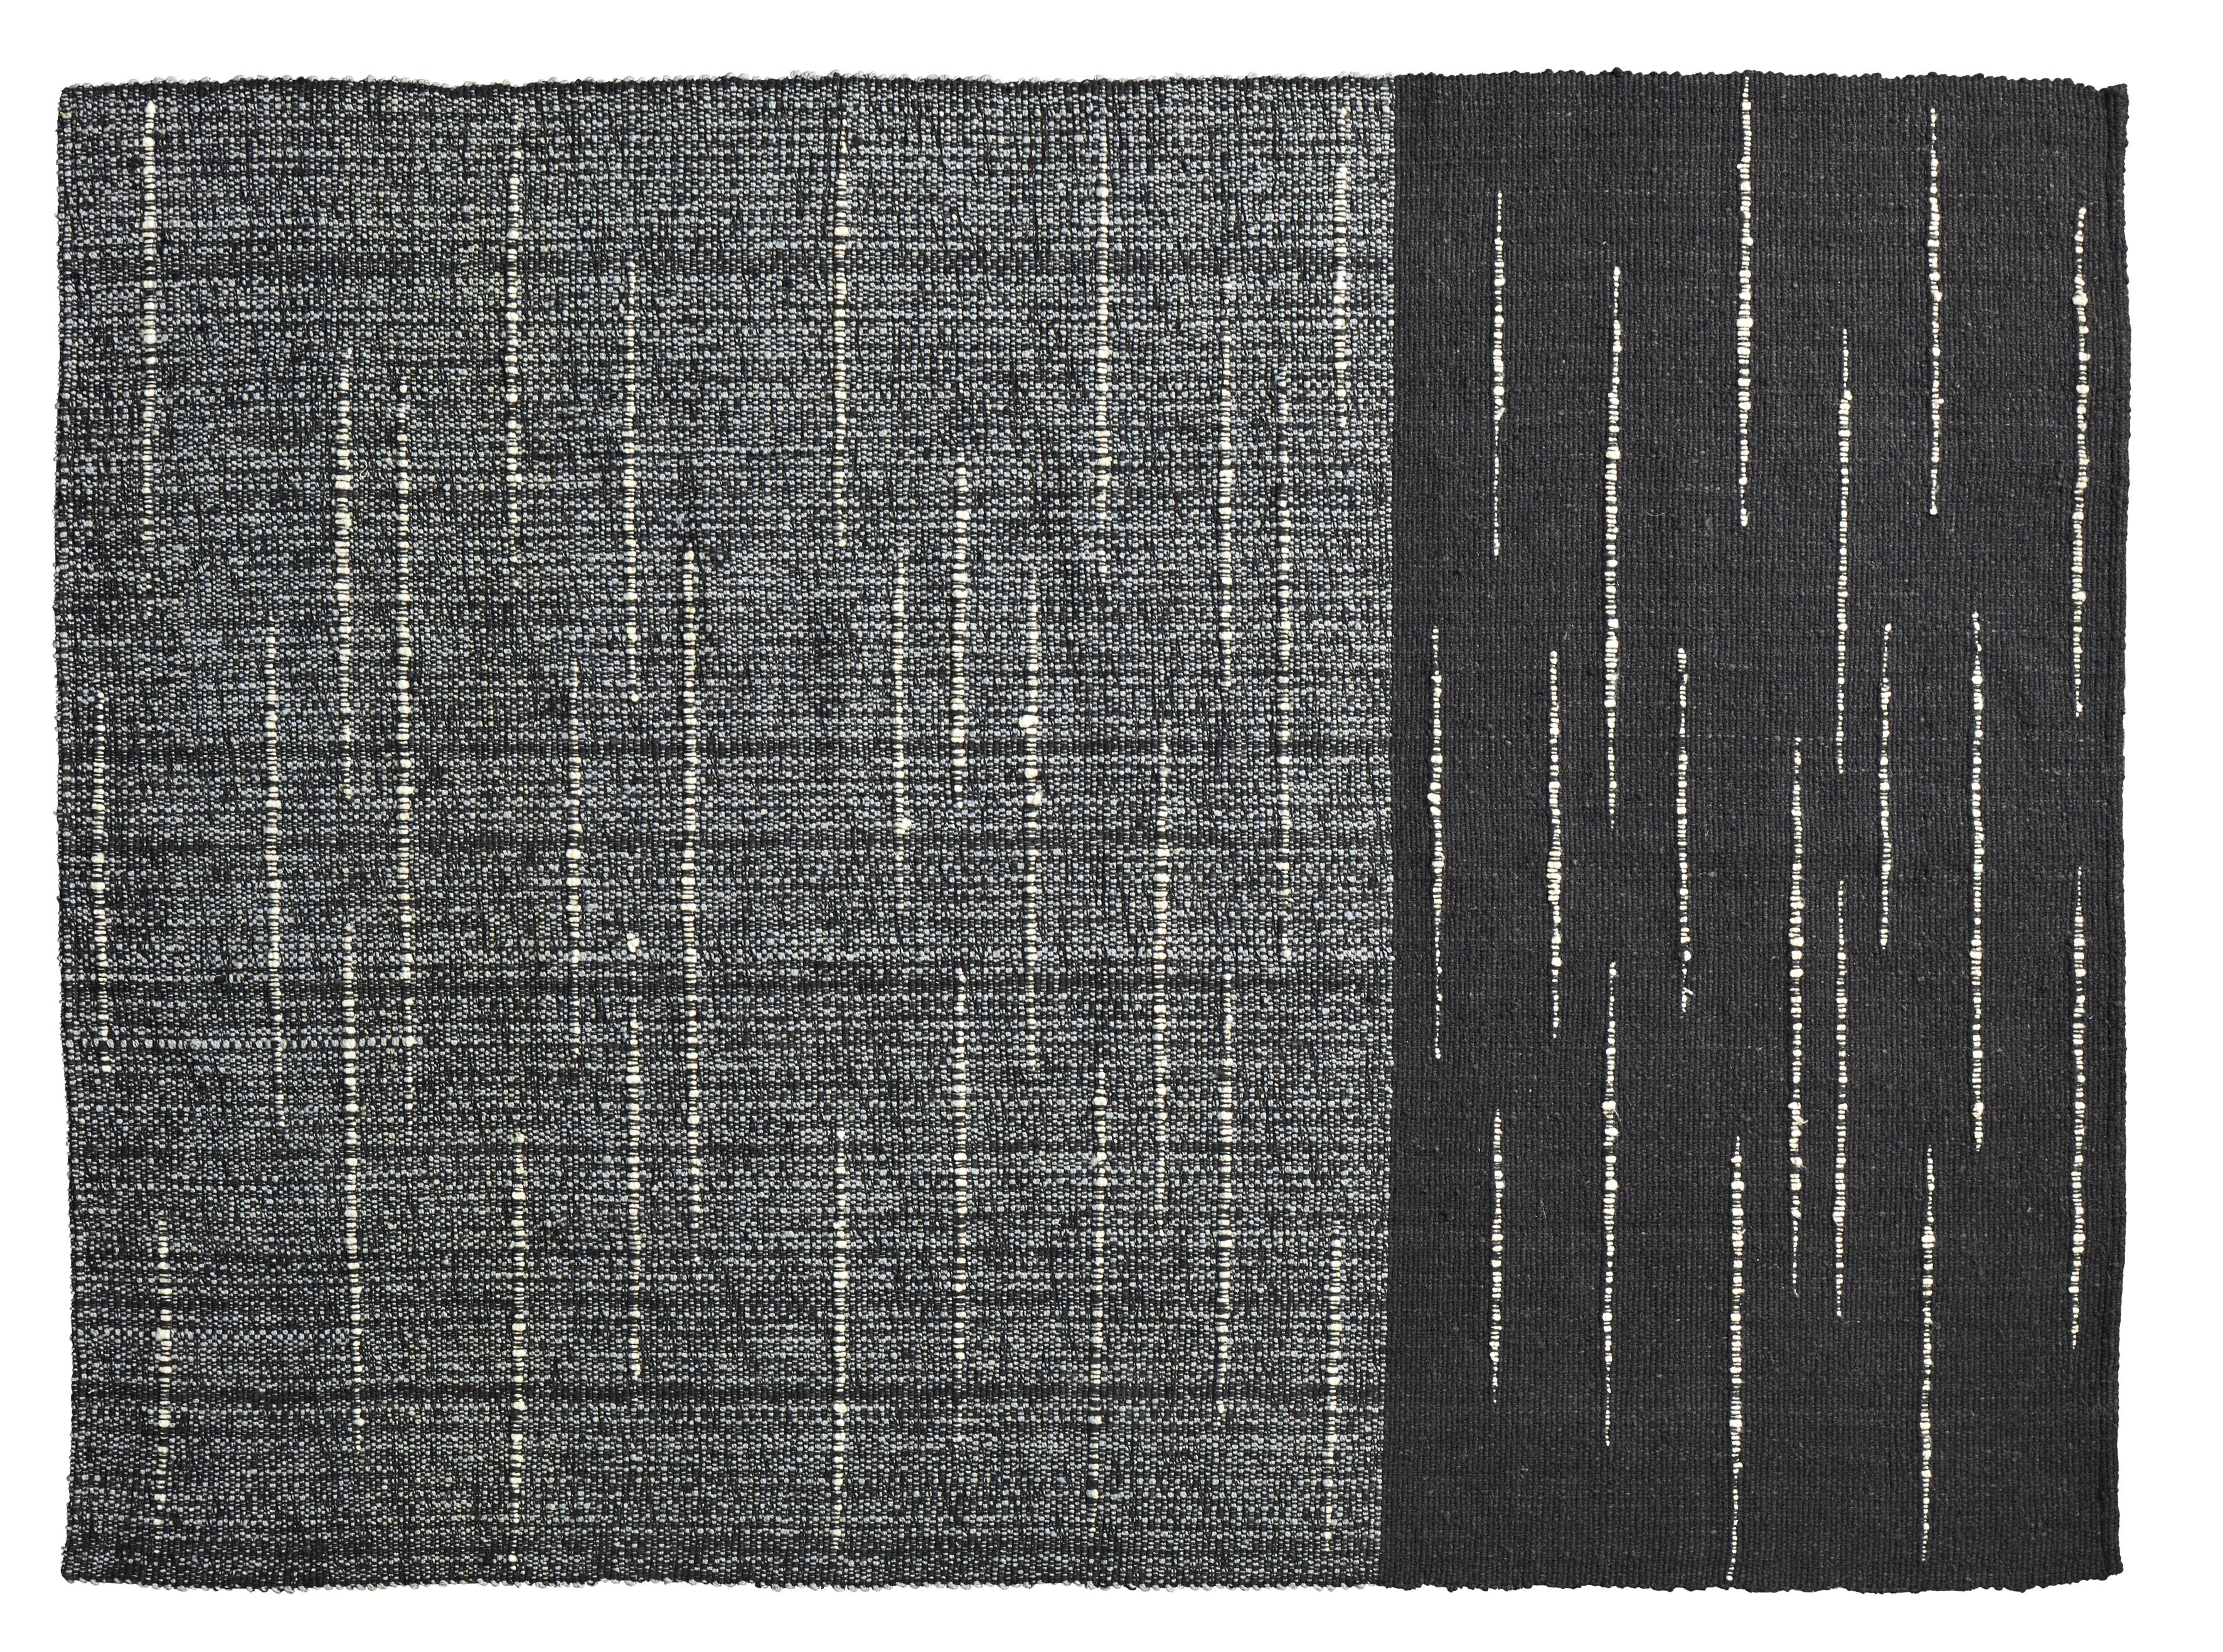 Large Oruga Subas rug by Sebastian Herkner
Materials: 100% natural virgin wool. 
Technique: Naturally dyed fibers. Hand-woven in Colombia.
Dimensions: W 310 x L 420 cm 
Available in colors: karo, linea 1, linea 2, moton, oruga. 

The Subas